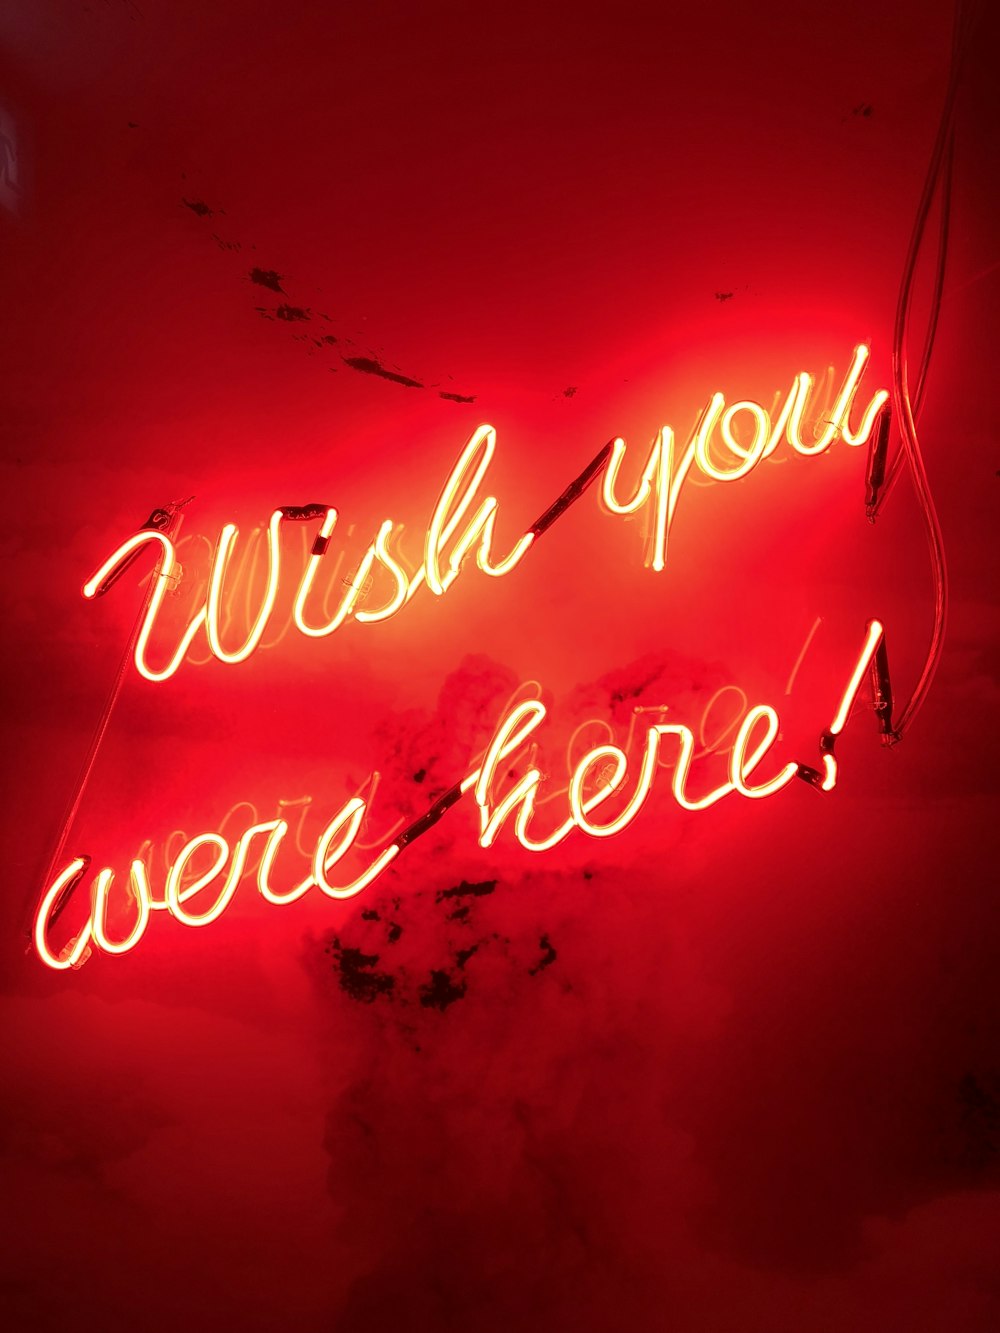 yellow wish you were here! neon sign